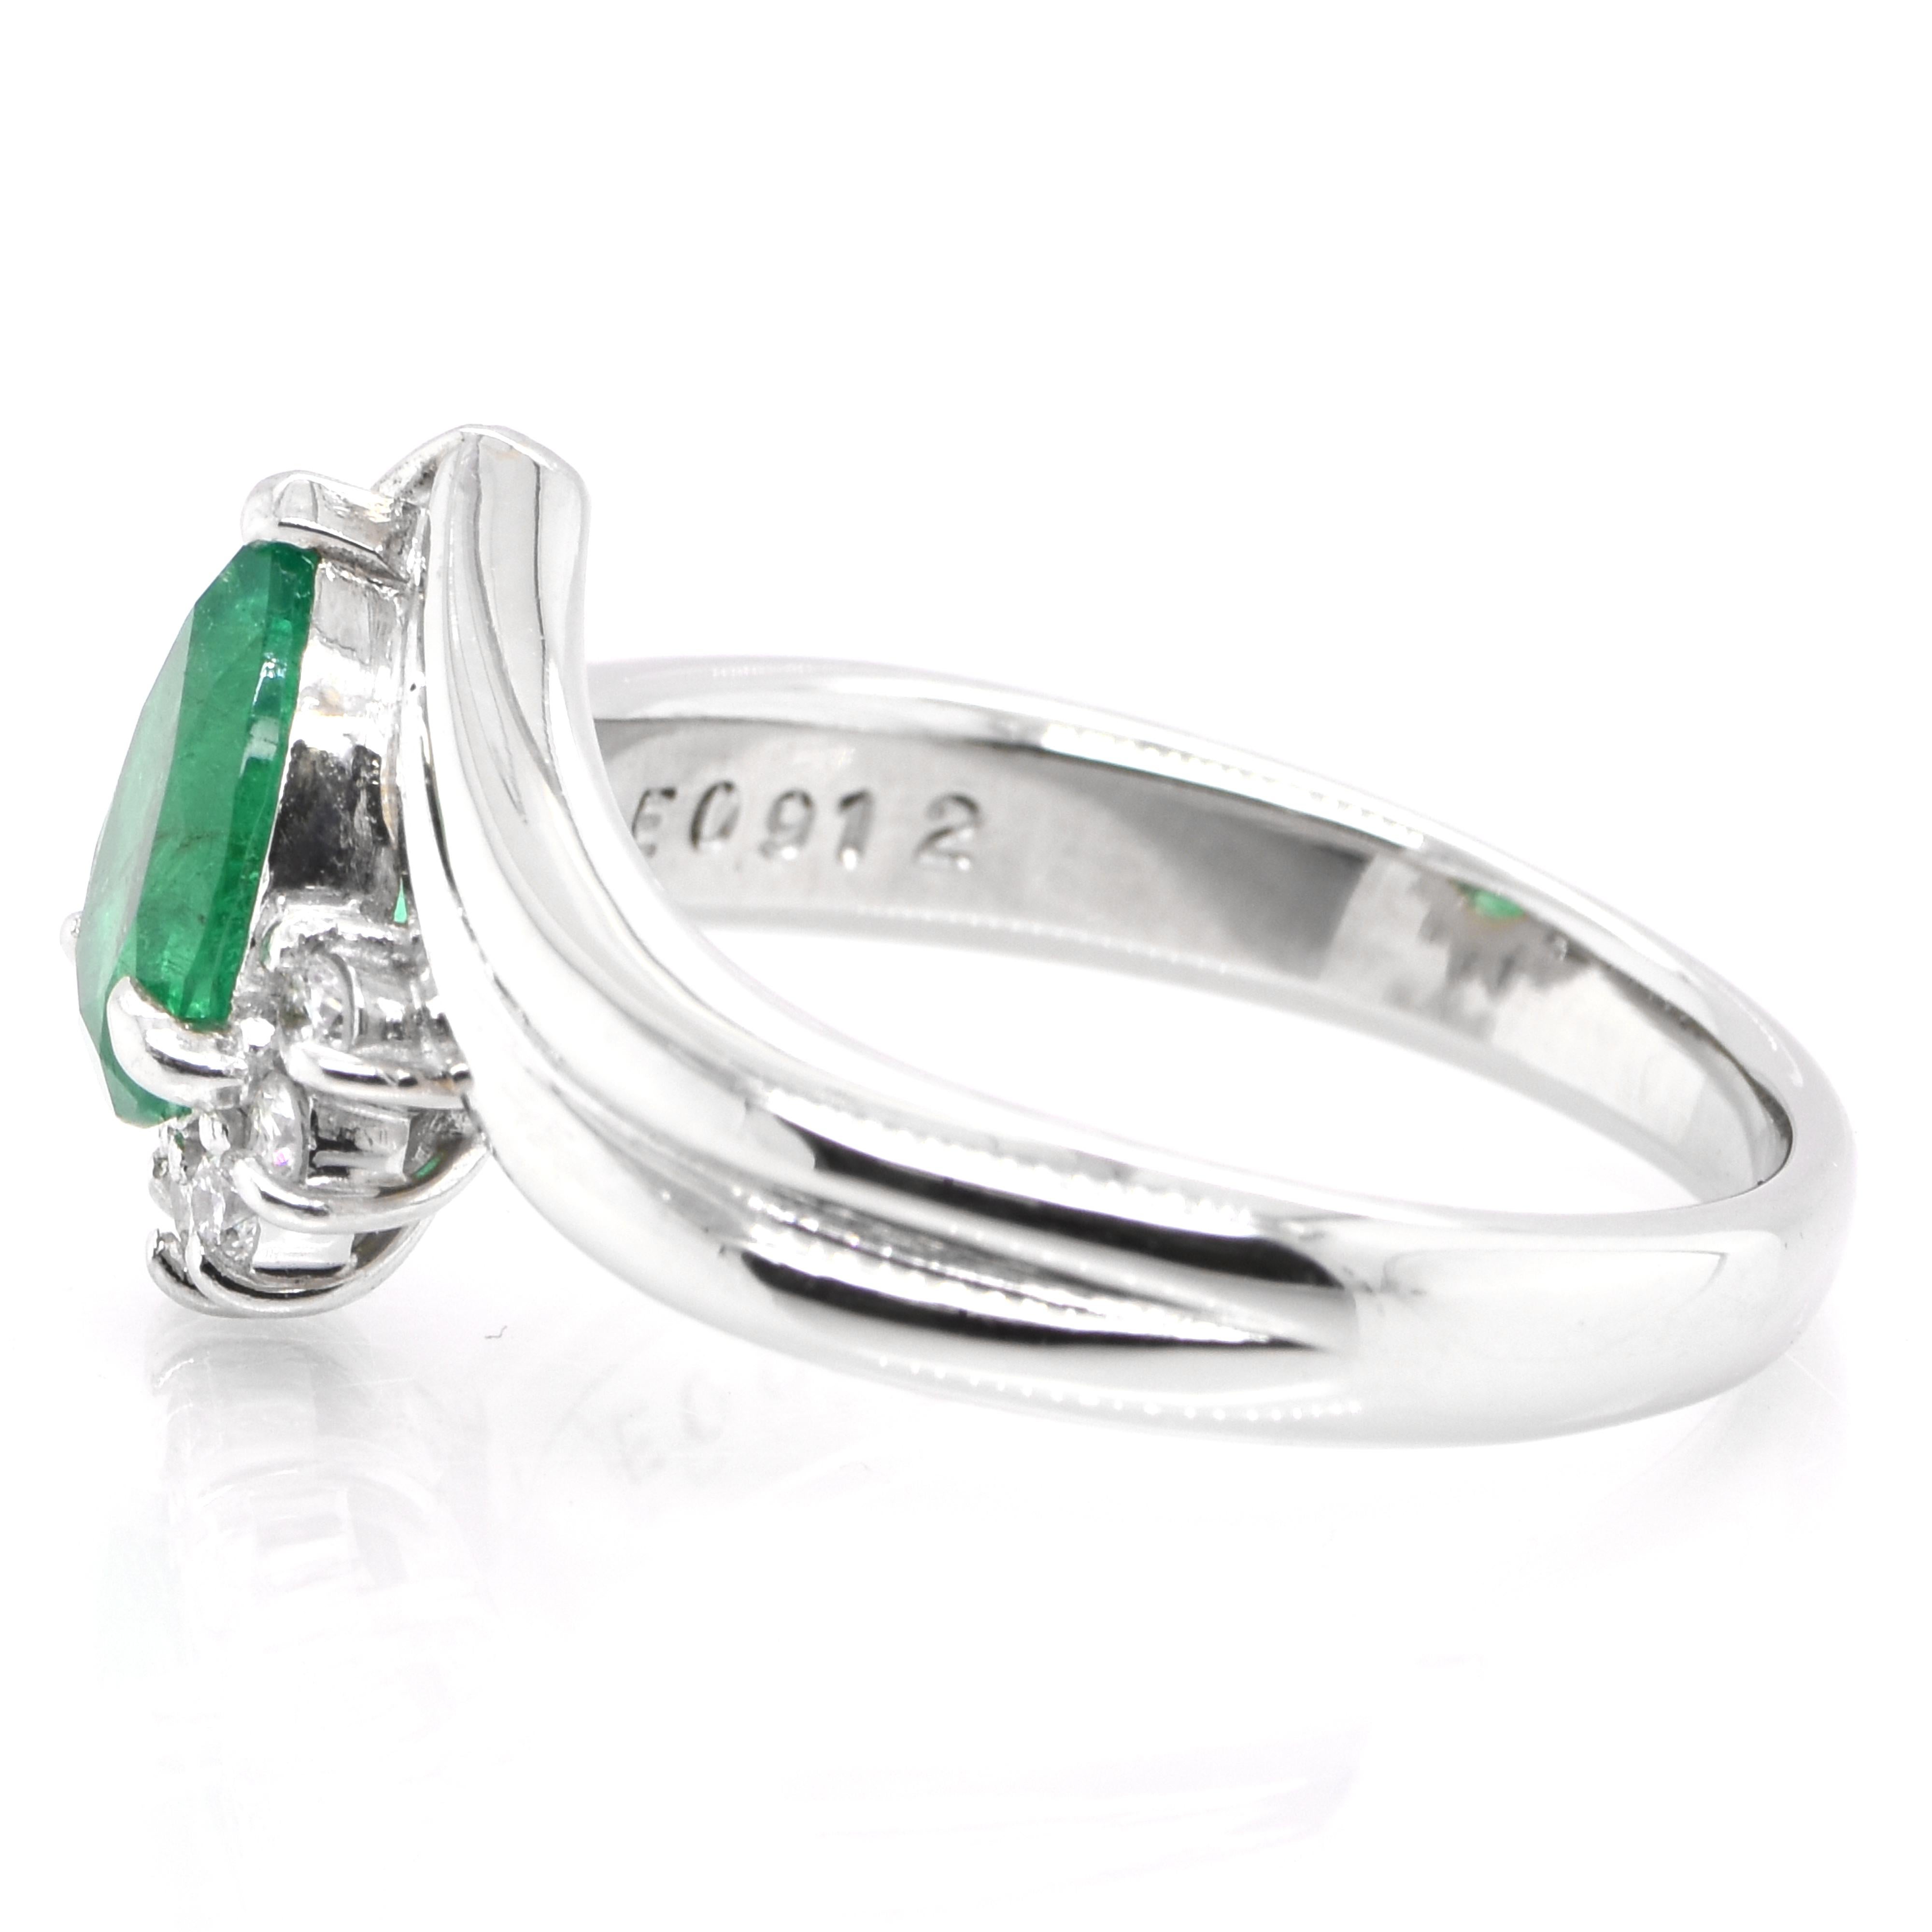 Pear Cut 0.91 Carat Colombian, Pear-Cut Emerald and Diamond Ring Set in Platinum For Sale